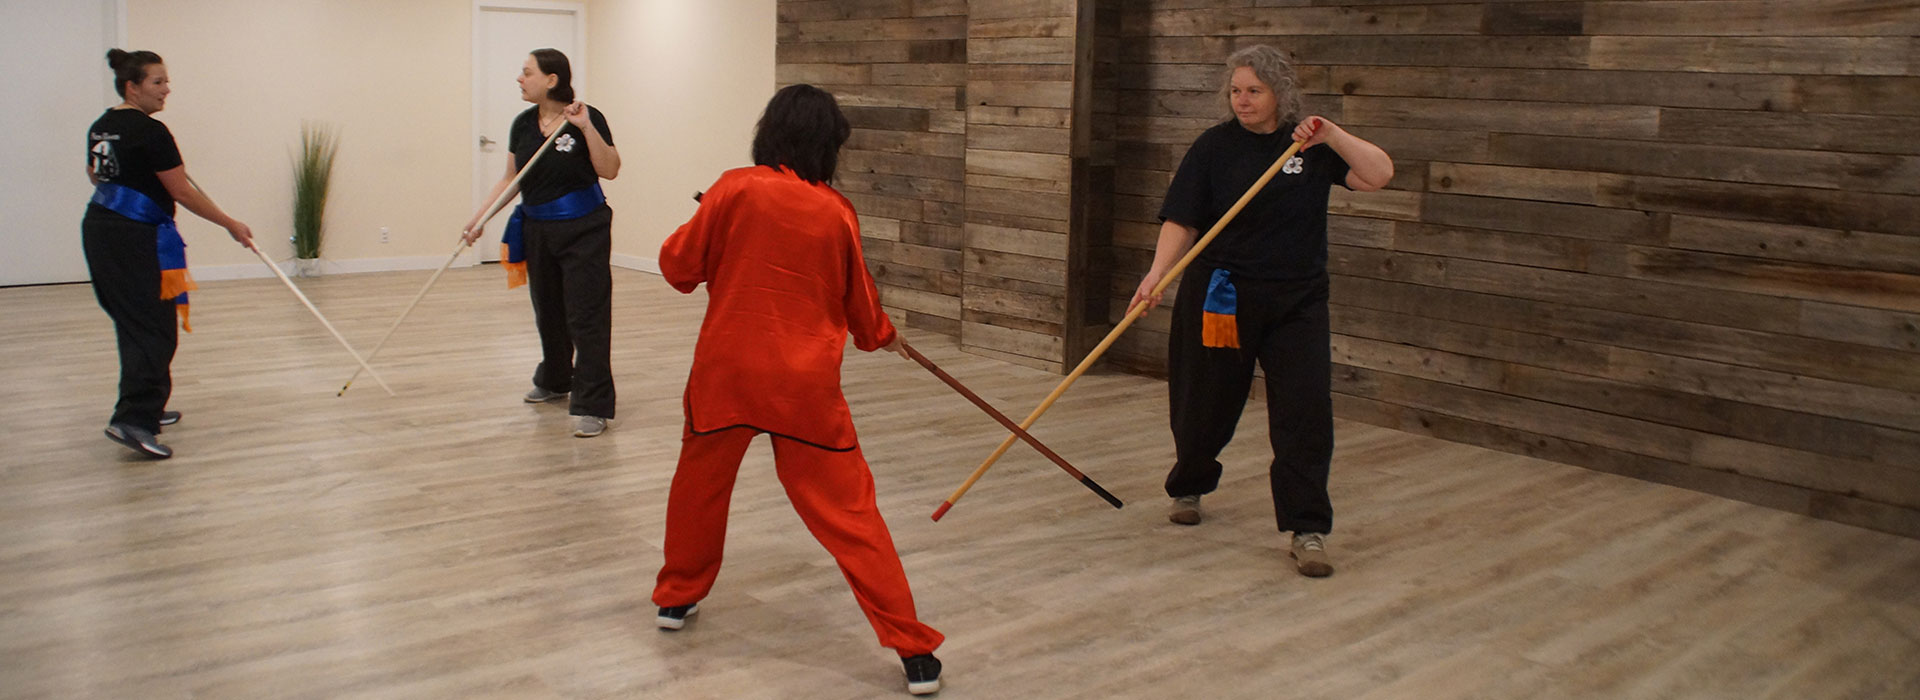 Sifu Peggy is a passionate Tai Chi instructor who found her love of martial arts as a young girl under the tutelage of her father, Patje Richard Kudding.